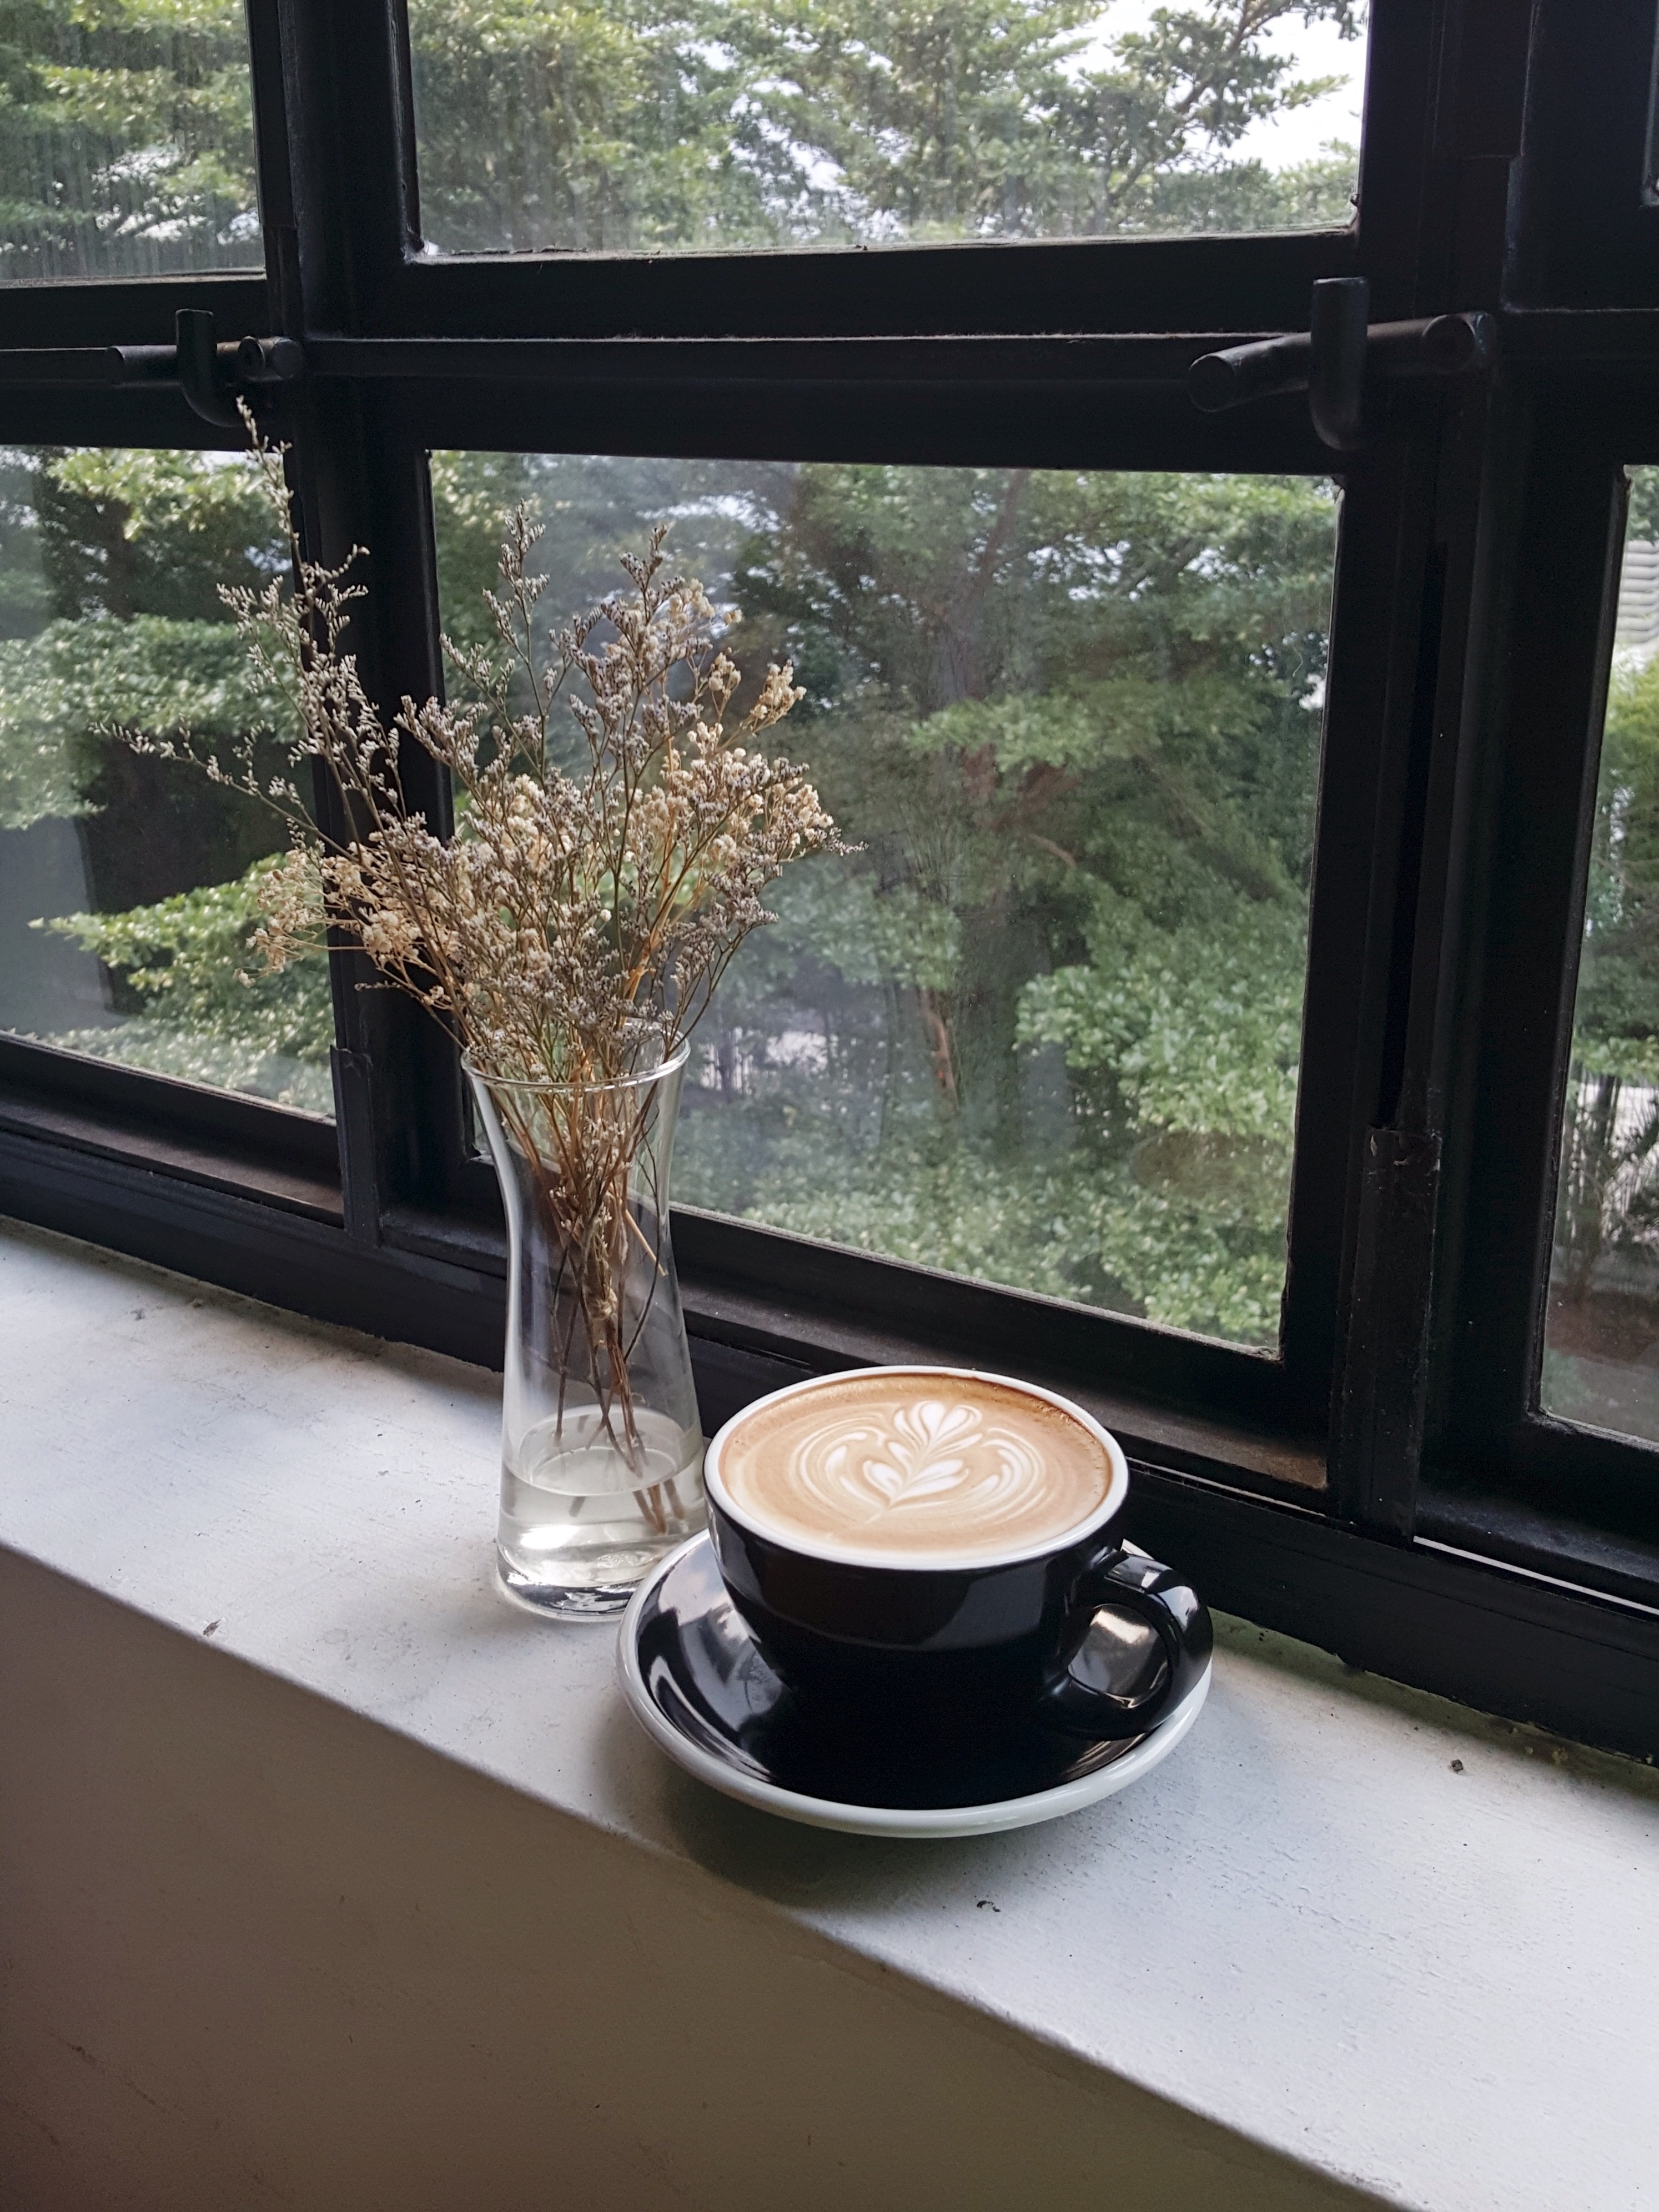 black ceramic mug filled with cappuccino coffee with saucer beside a clear glass flower vase and black wooden framed window